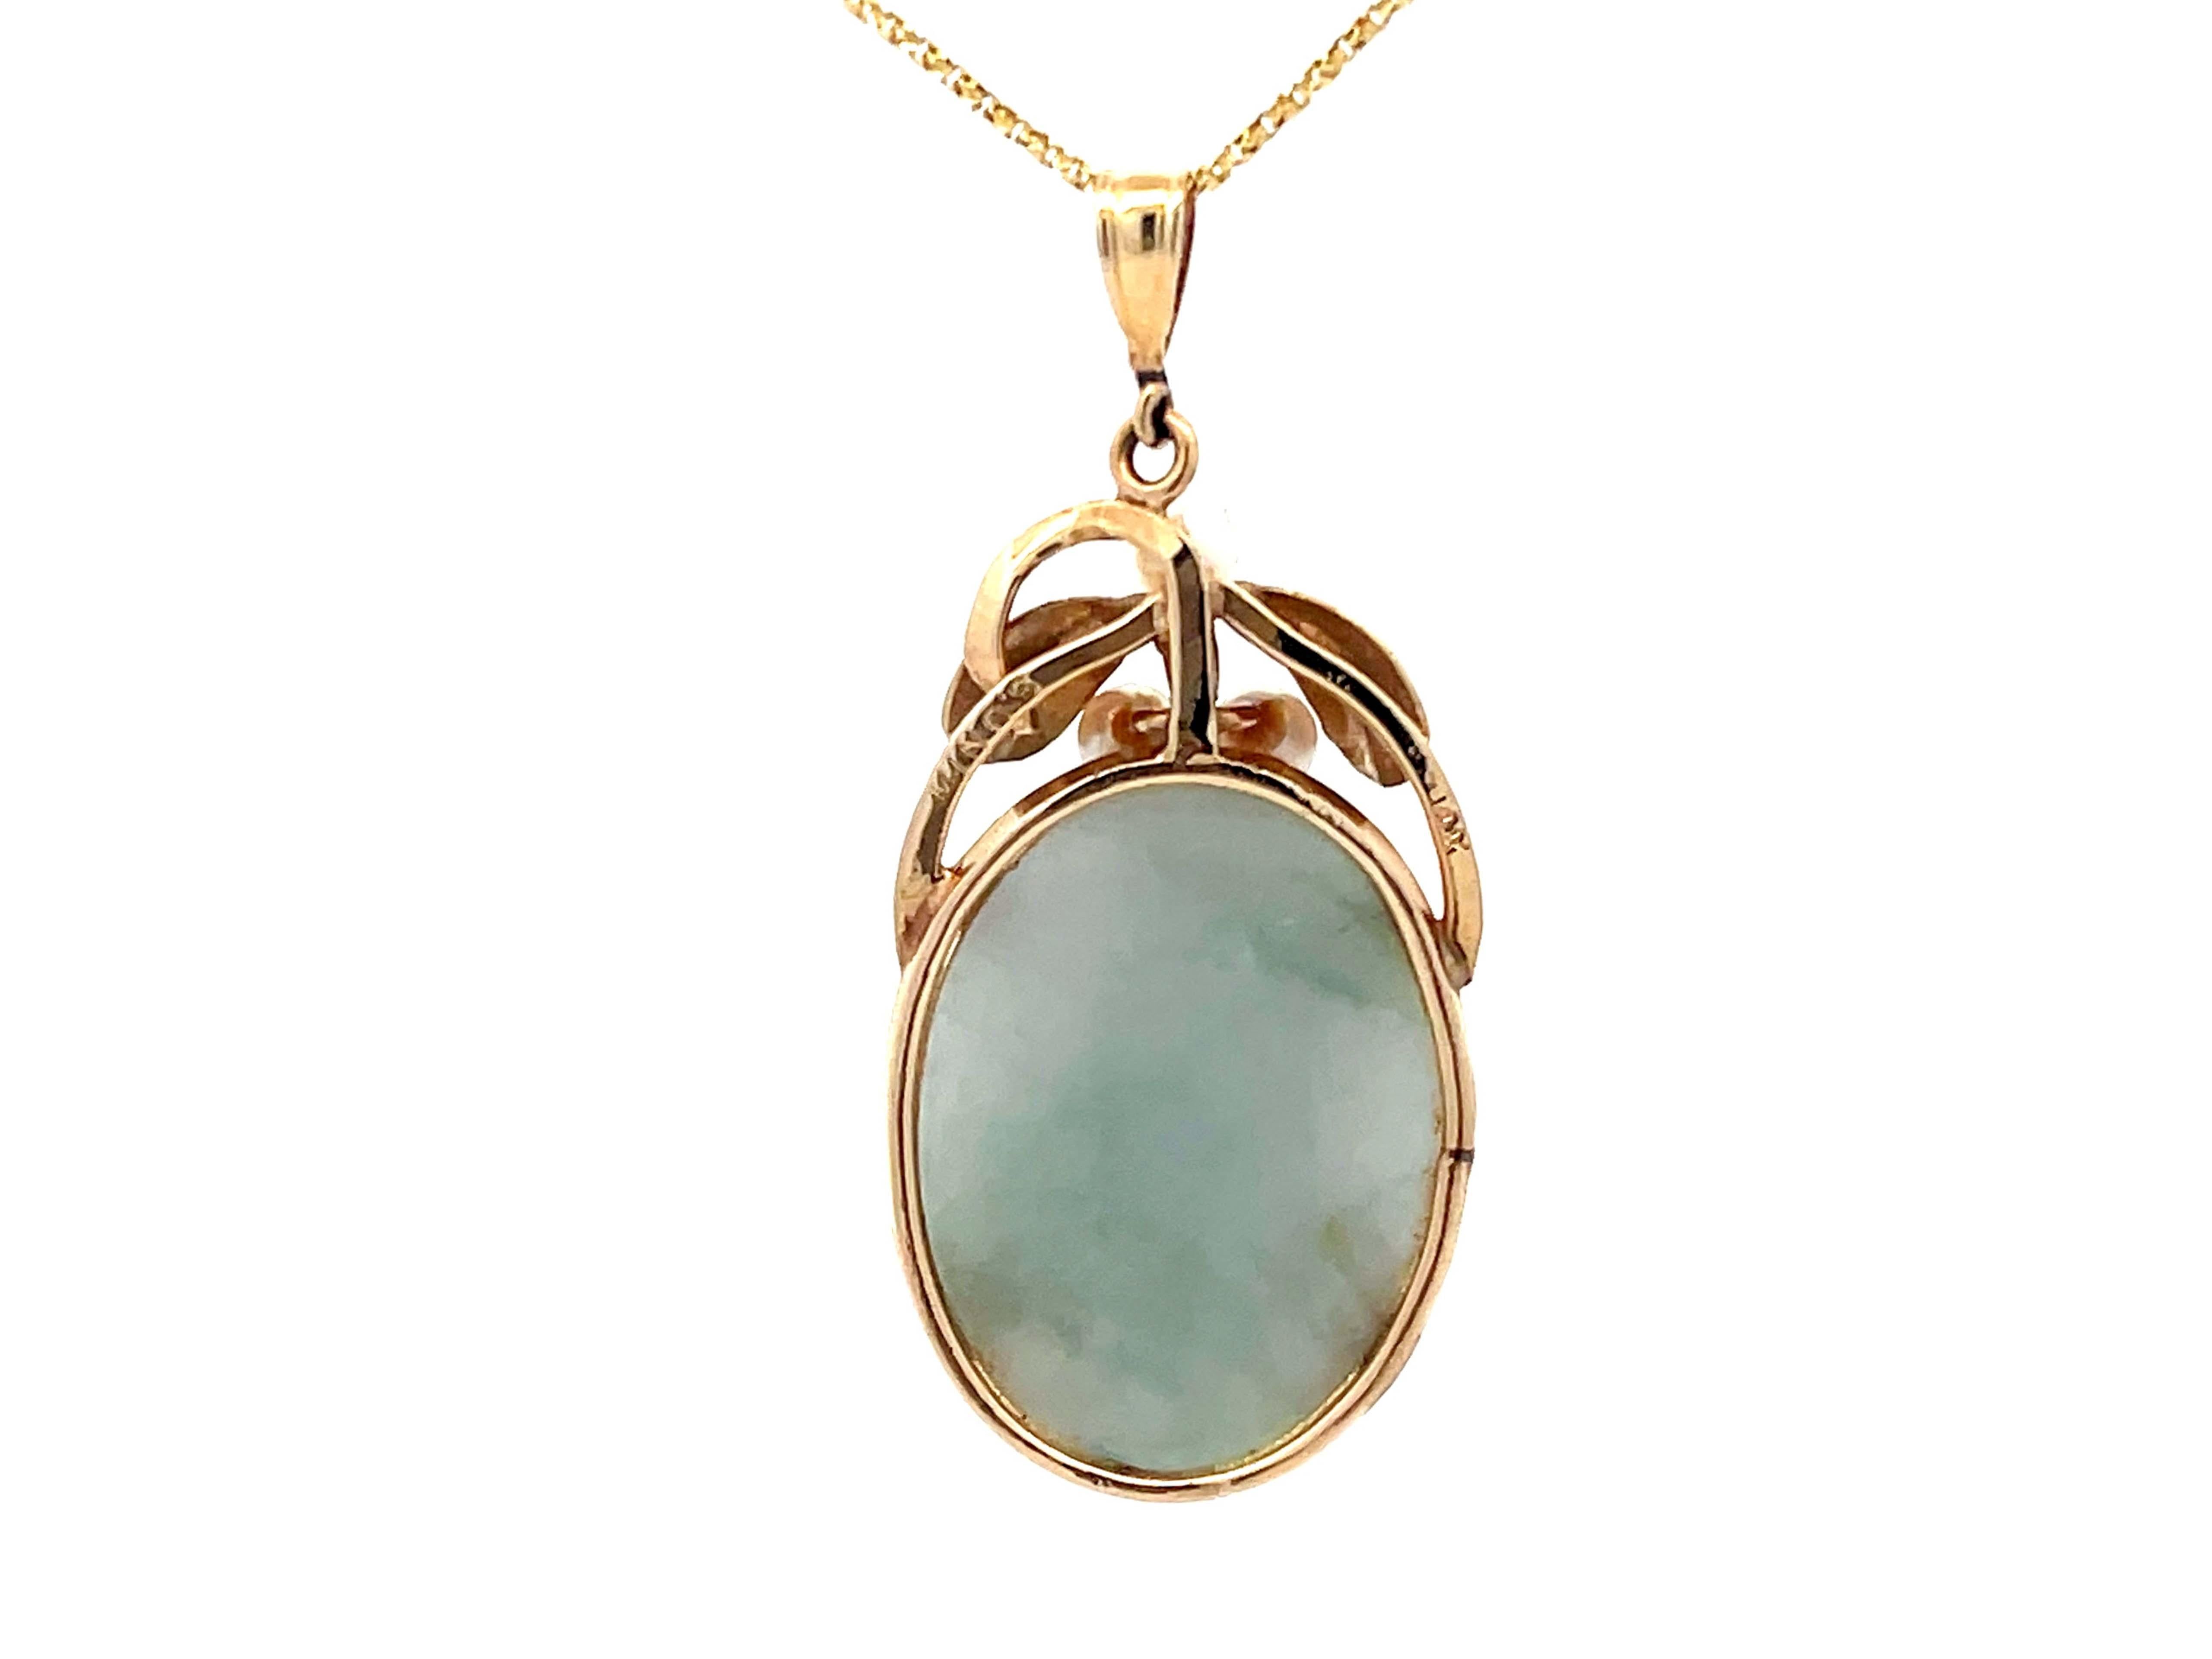 Mings Hawaii Carved Nephrite Jade & Pearl Pendant in 14k Yellow Gold with Chain For Sale 1